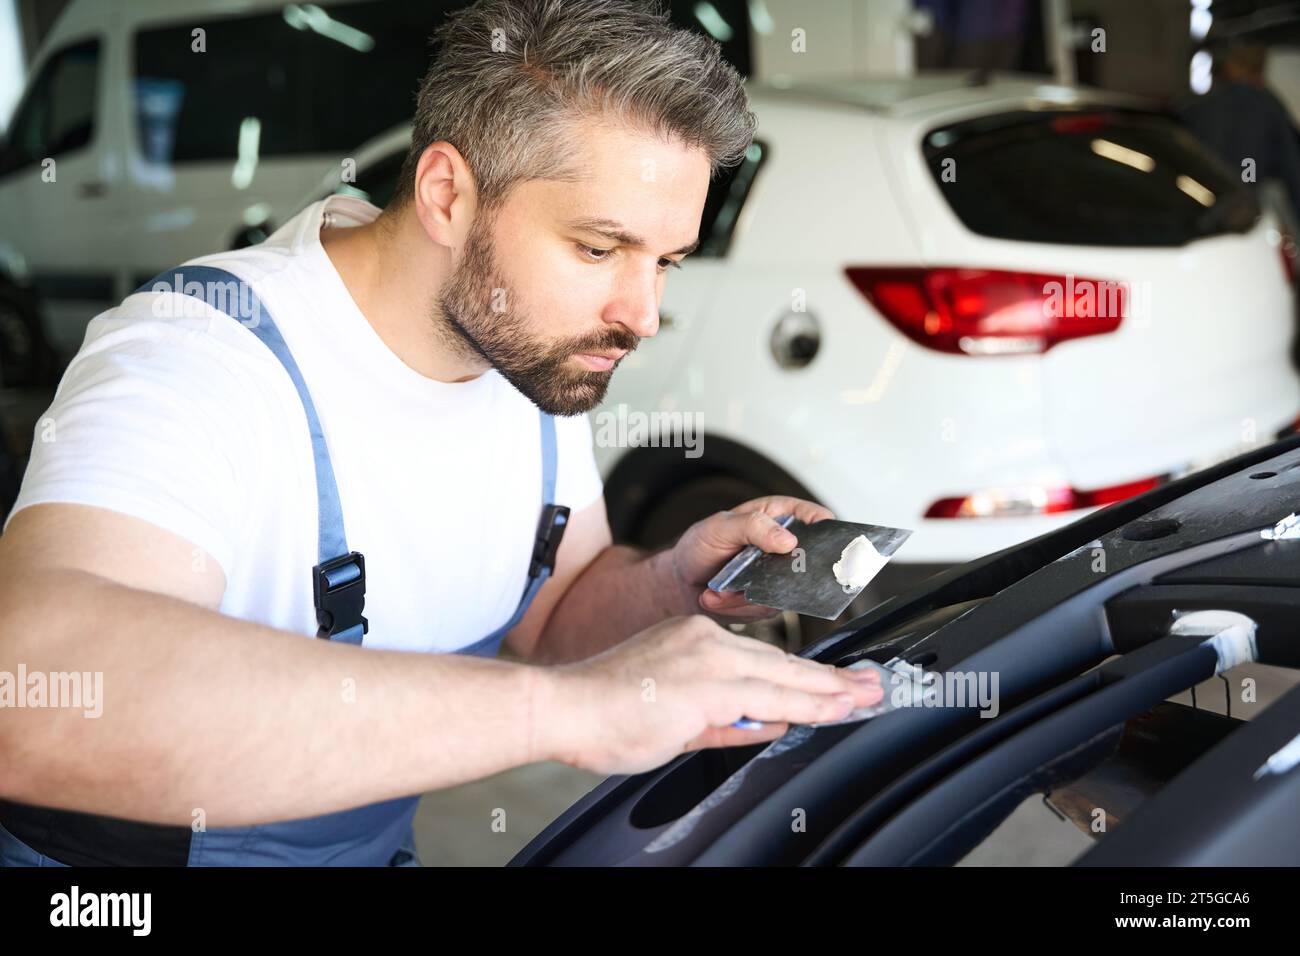 Experienced car detailer removing scratches from automotive body part Stock Photo